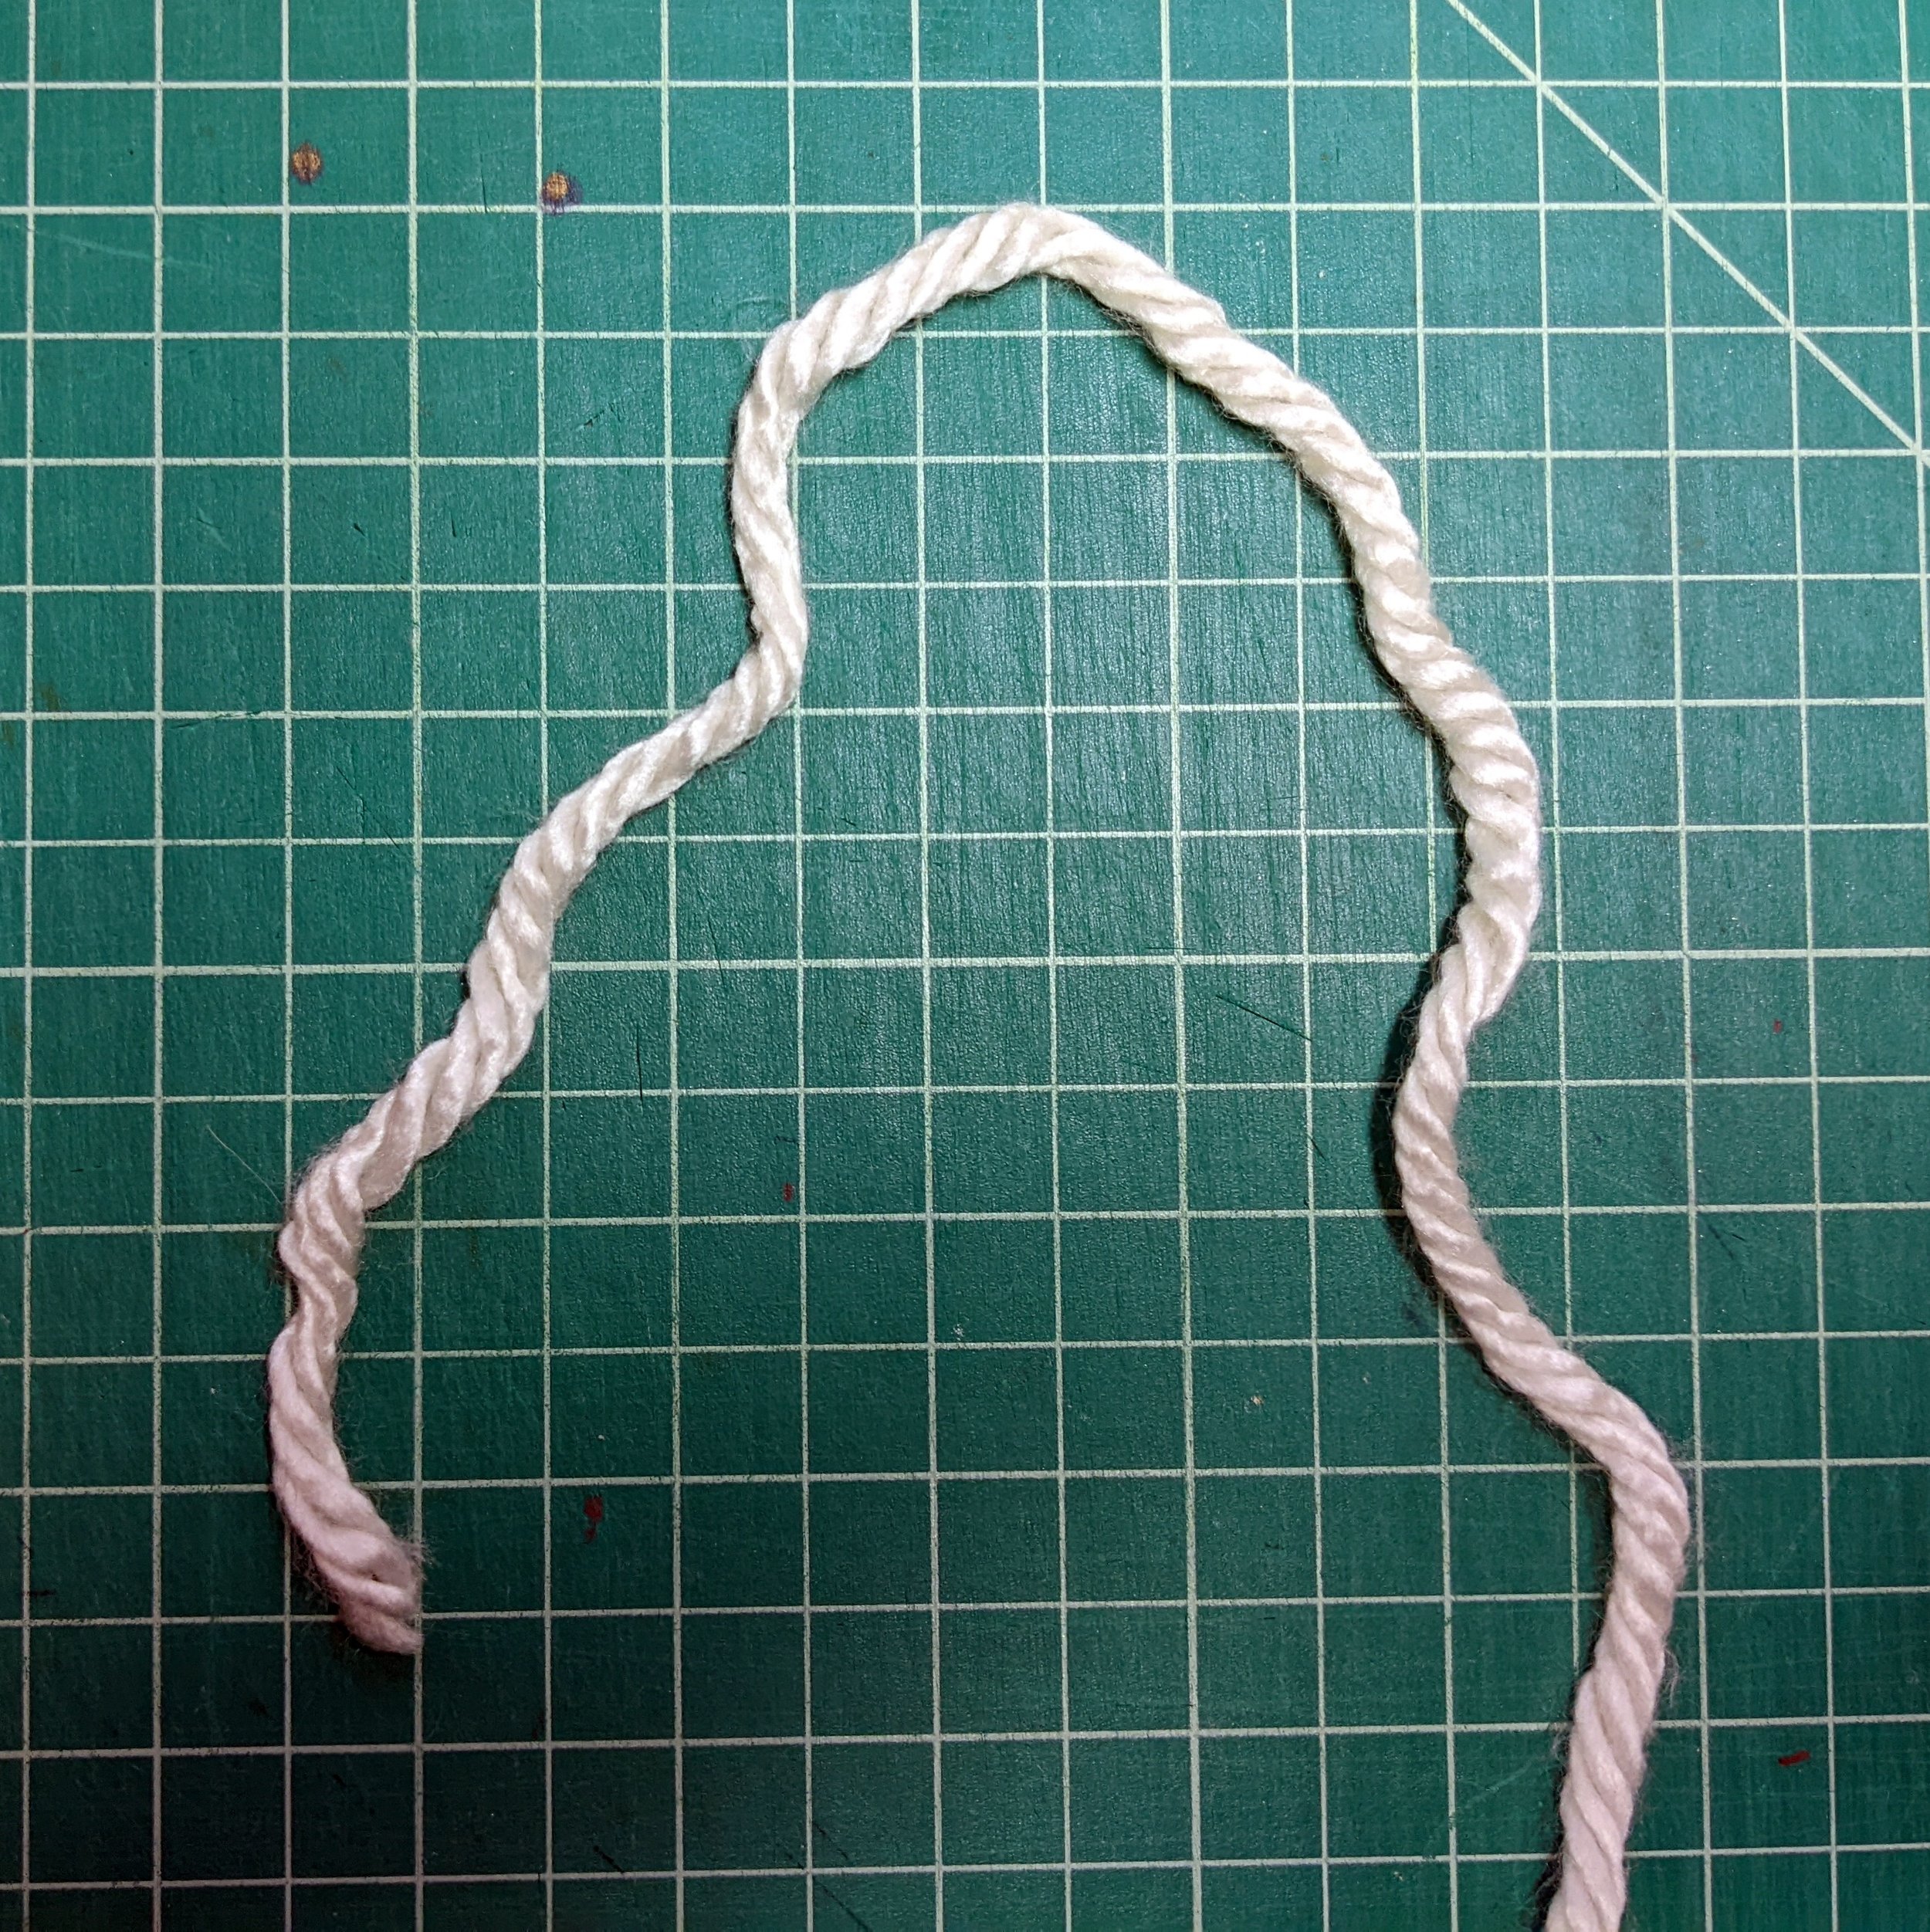 Step 1: Start with the short end of the yarn on the left and the end that connects to your ball of yarn on the right.